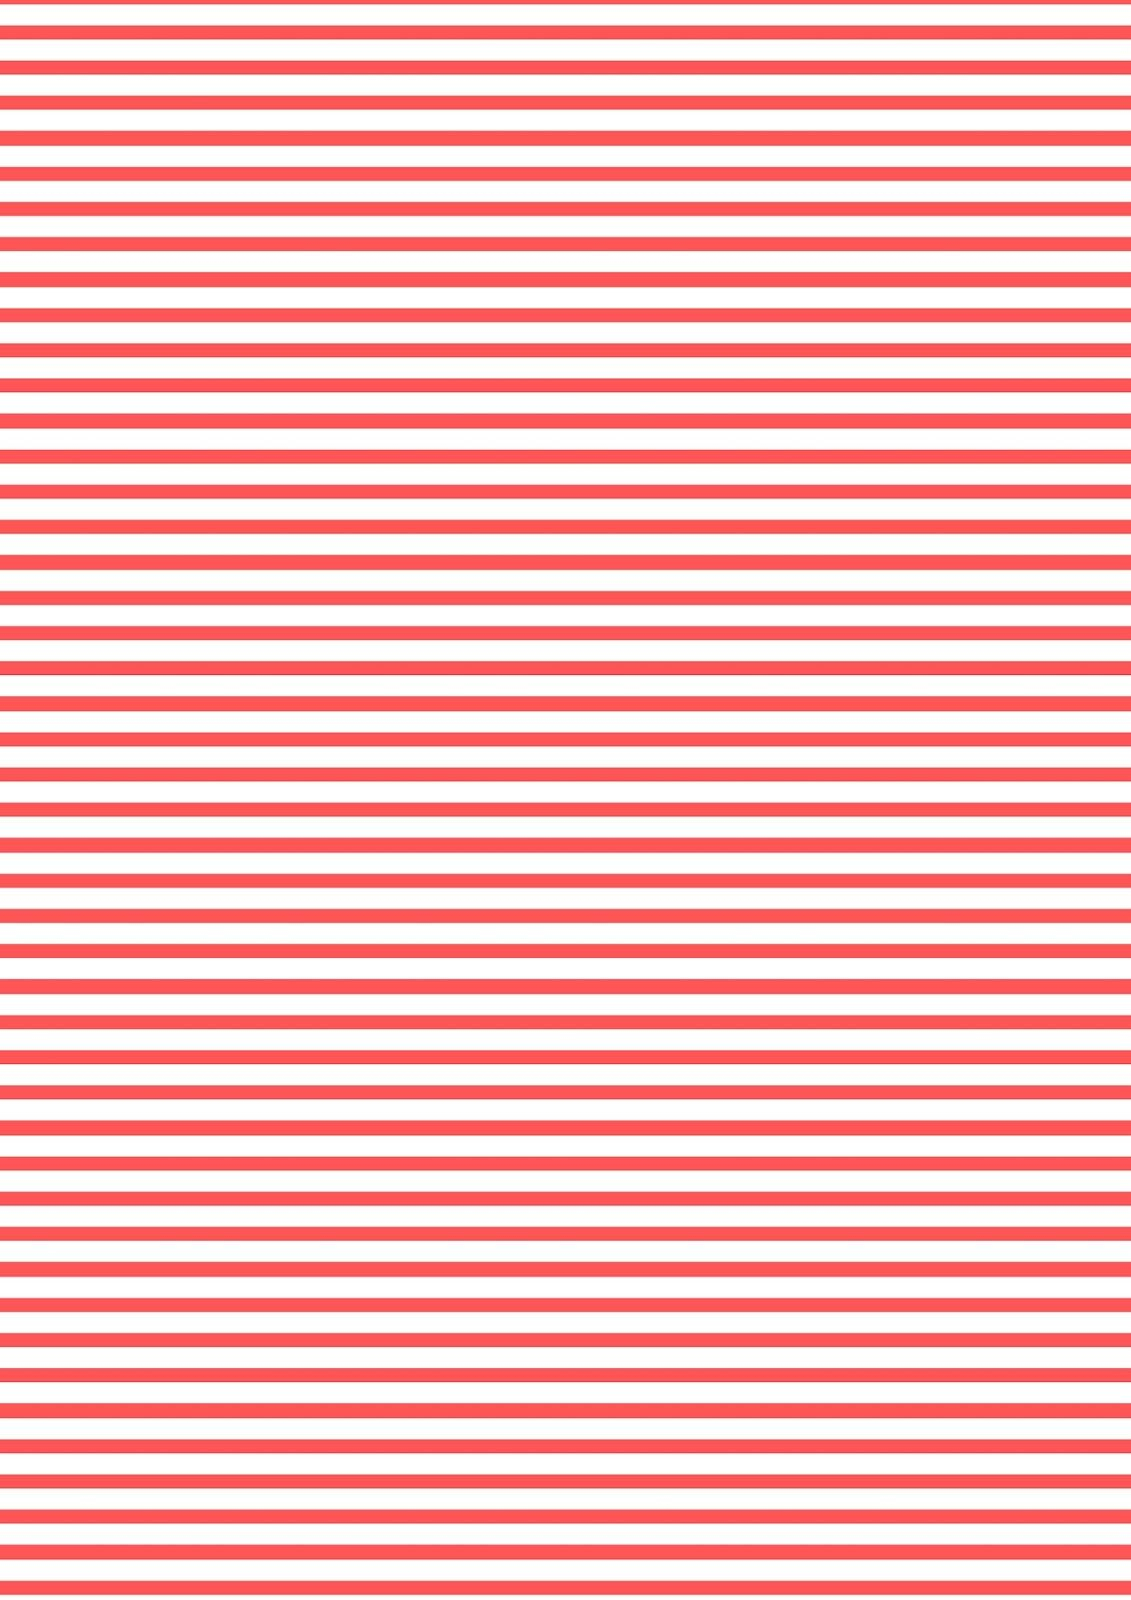 Free Printable Stars And Stripes Pattern Papers - Ausdruckbares - Free Printable Wallpaper Patterns